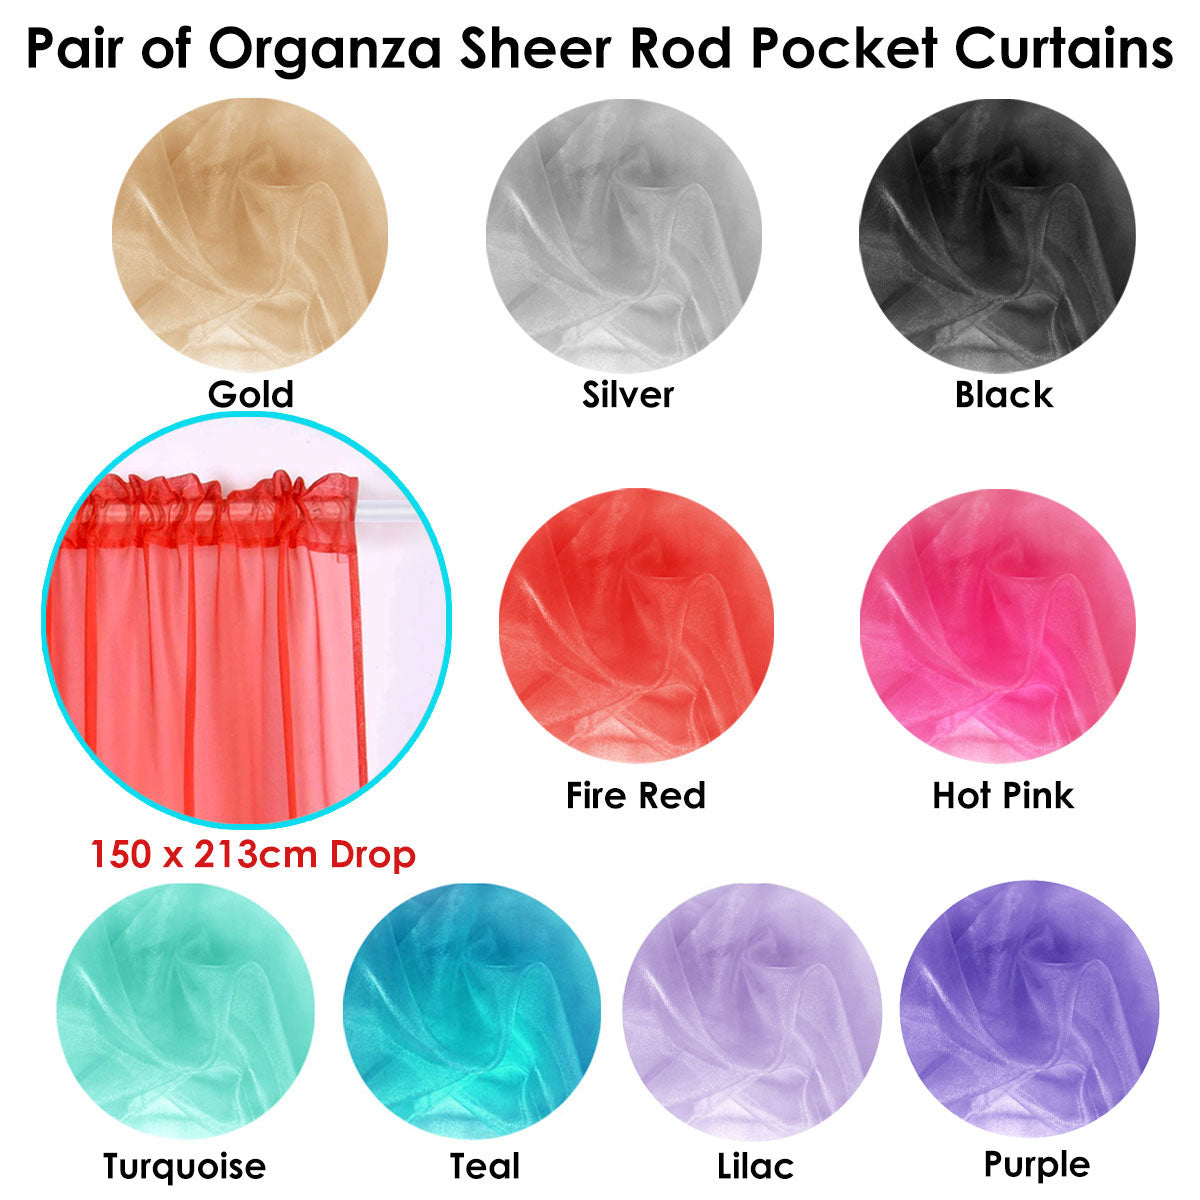 Pair of Organza Sheer Rod Pocket Curtains Fire Red - SILBERSHELL